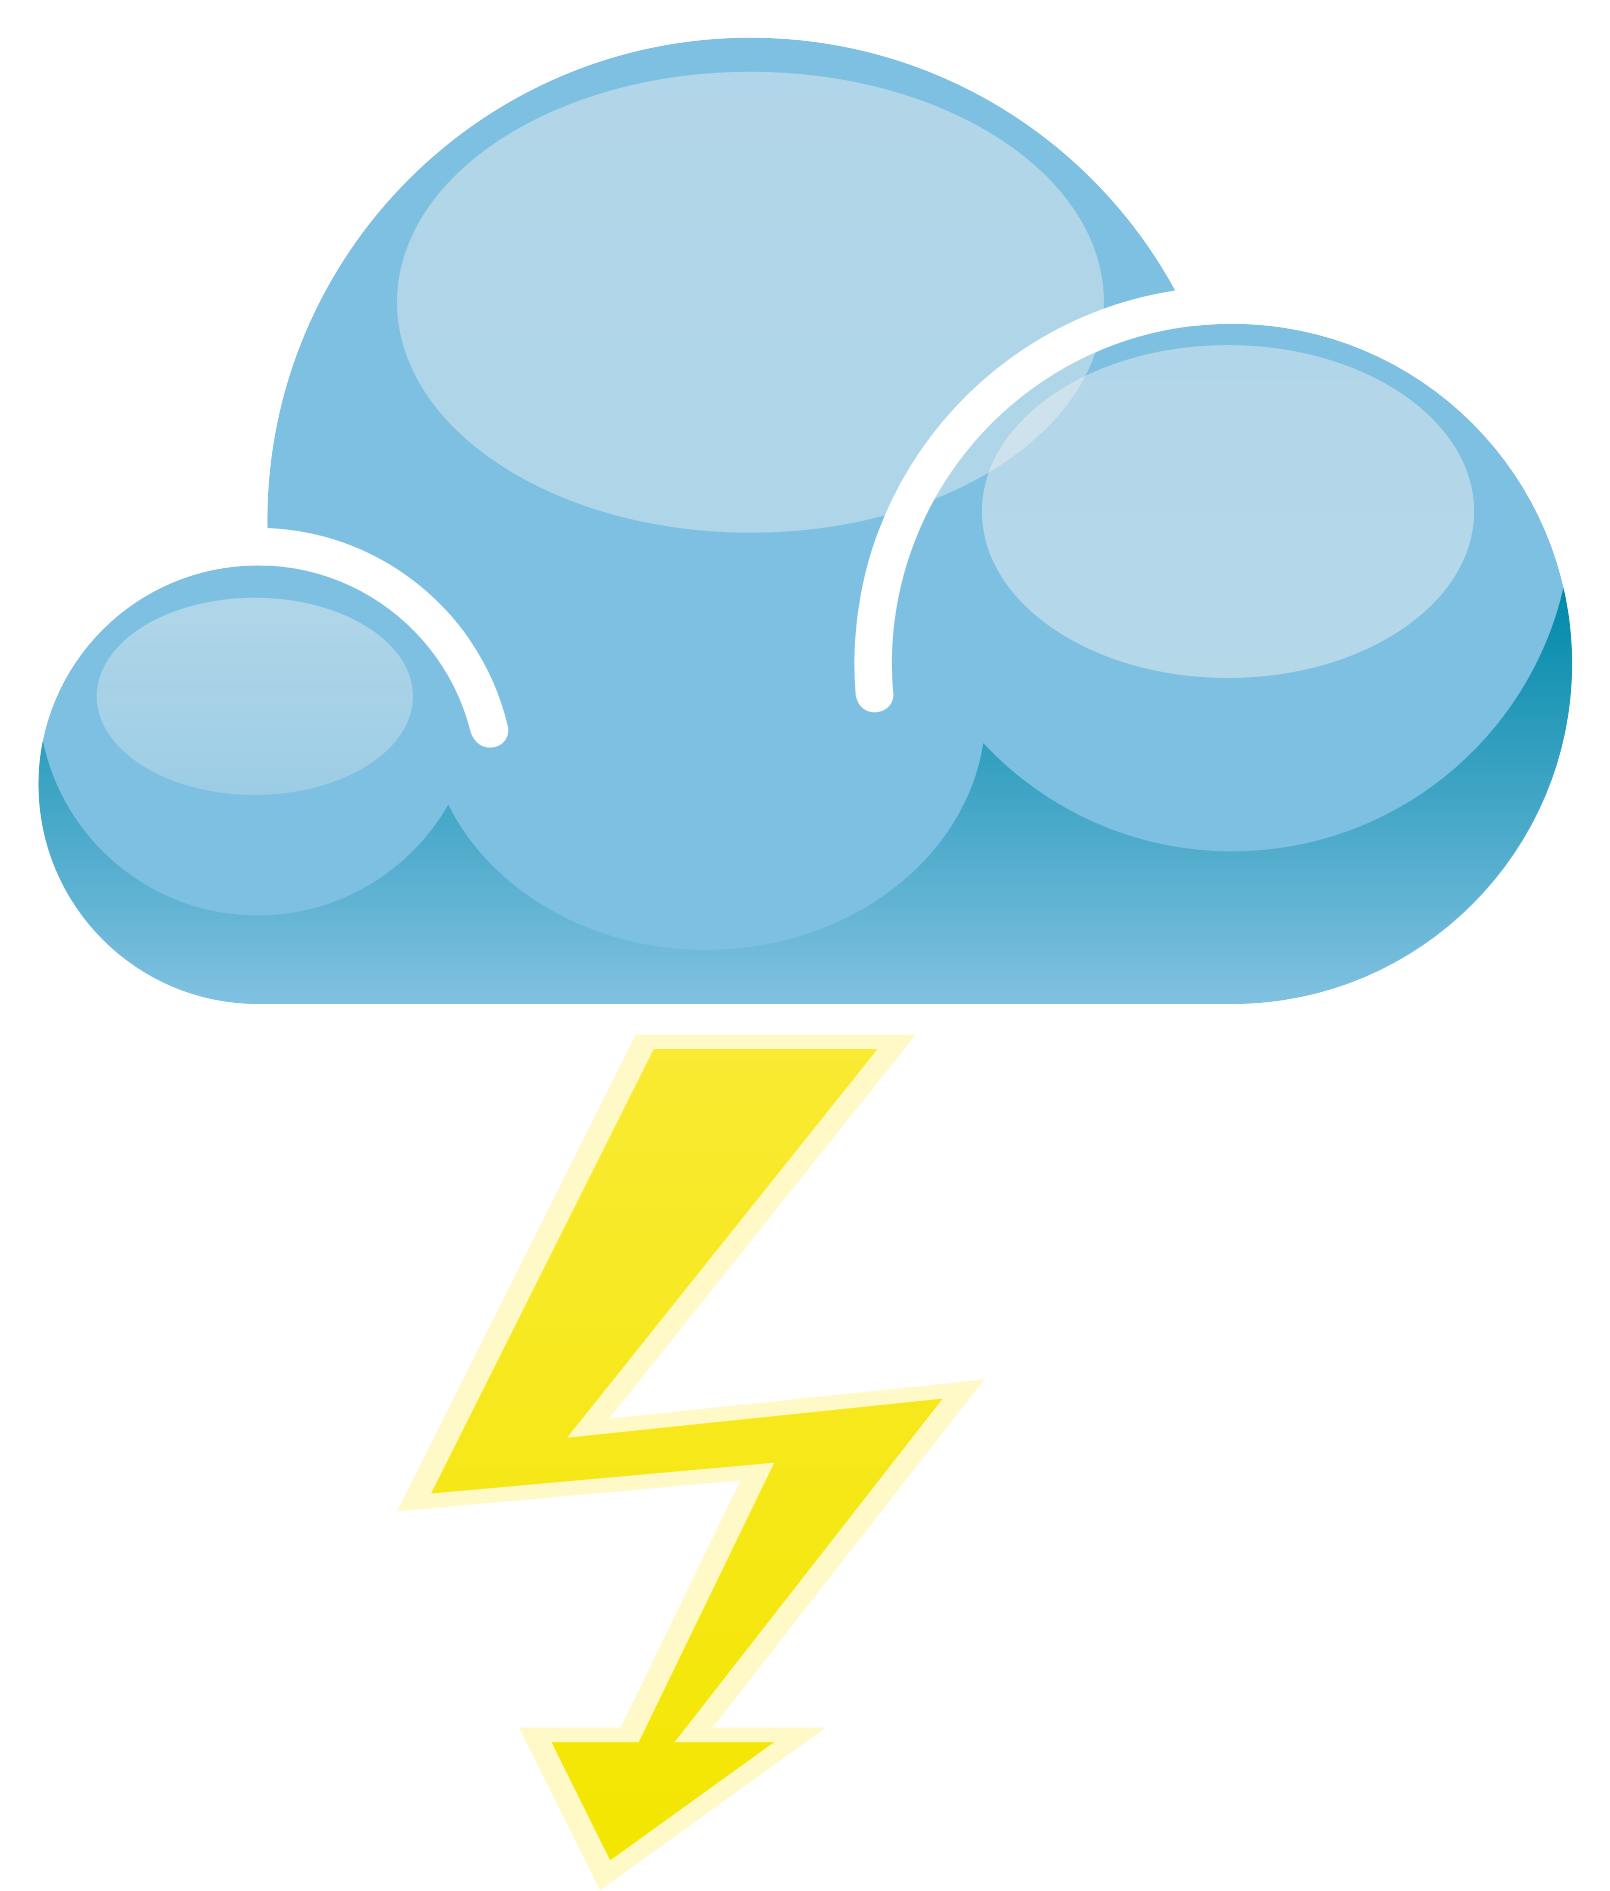 Clipart Meteo Temporale Rh Openclipart Org Clip Art - Thunder And Lightning Symbol (1610x1891)